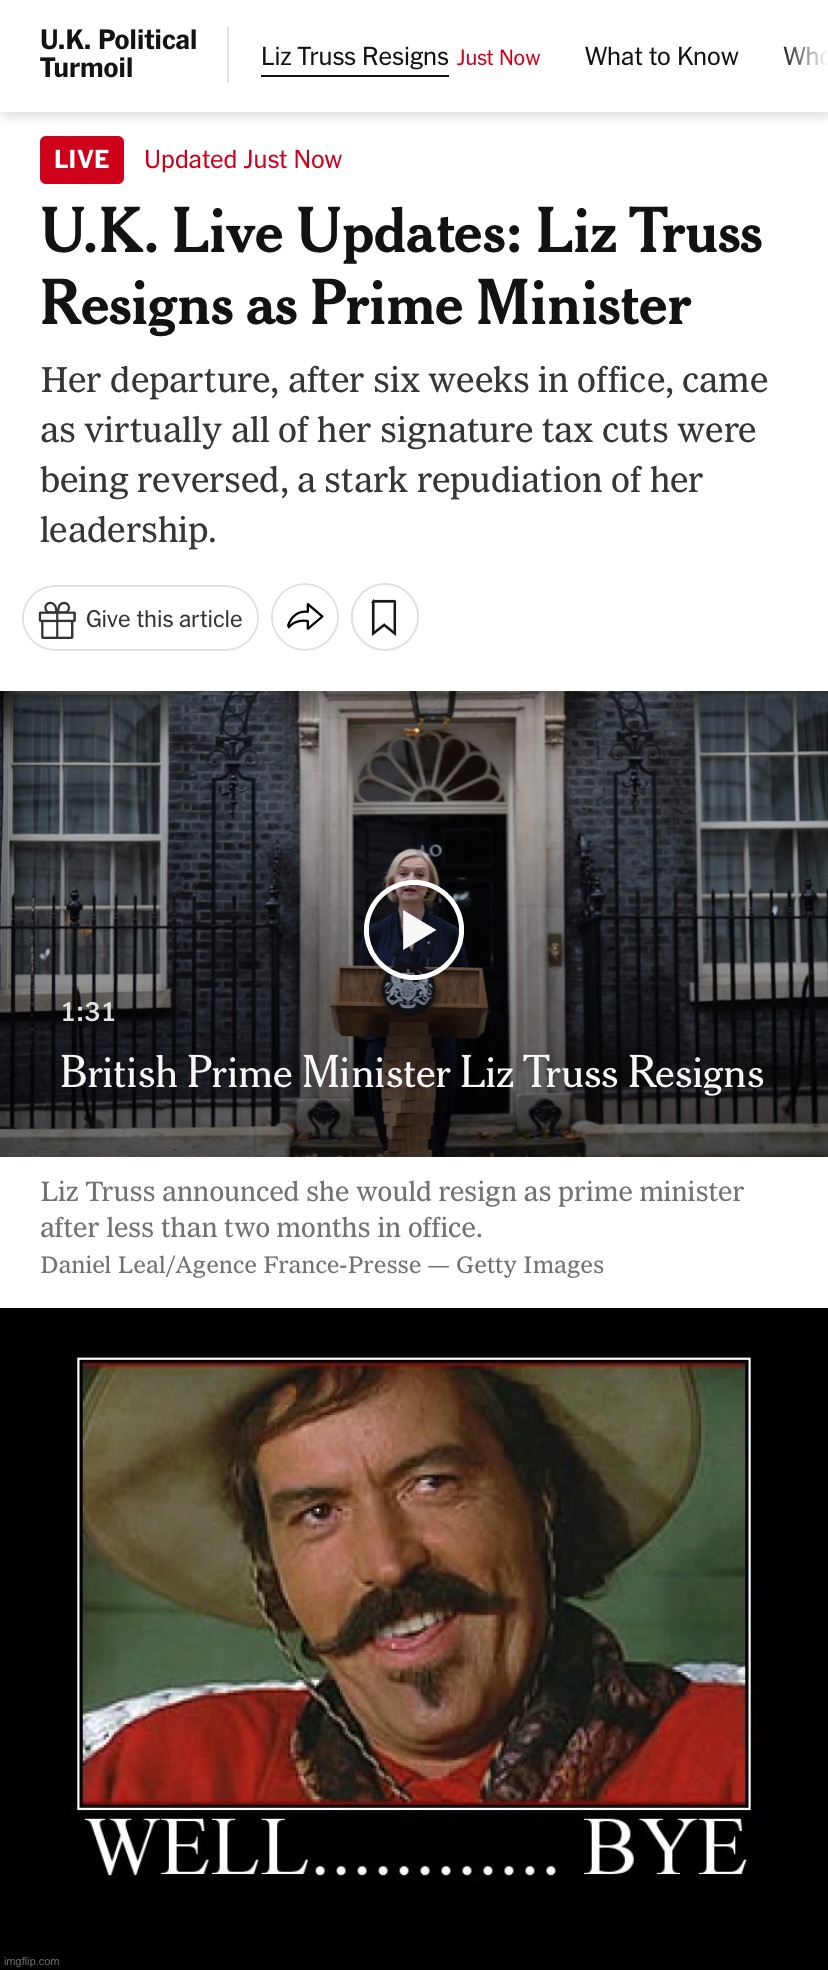 Liz Truss: The PM who lasted longer than a head of lettuce, but shorter than an IncognitoGuy presidency | image tagged in liz truss resigns as pm,well bye,liz truss,anglophobia,lettuce,incognitoguy | made w/ Imgflip meme maker